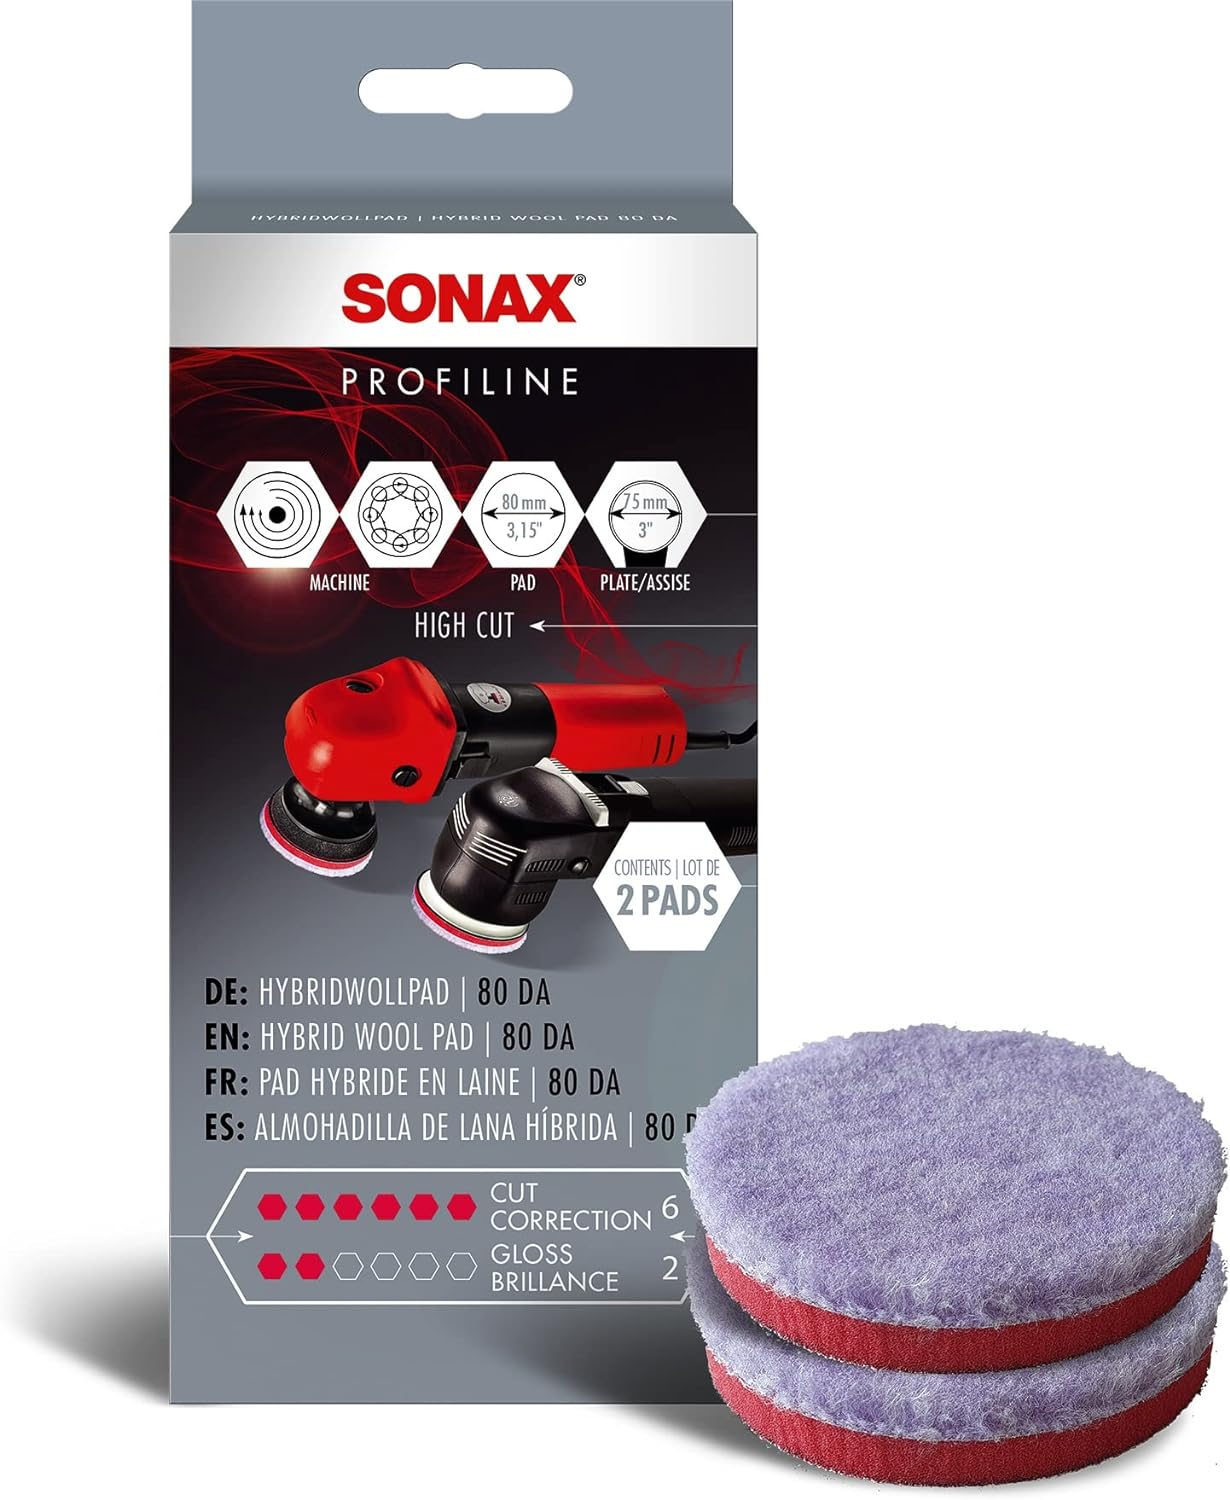 Sonax Hybrid Wool Pad - 76.2 mm (3.0")  (2 Pieces) - Sierra Madre Collection